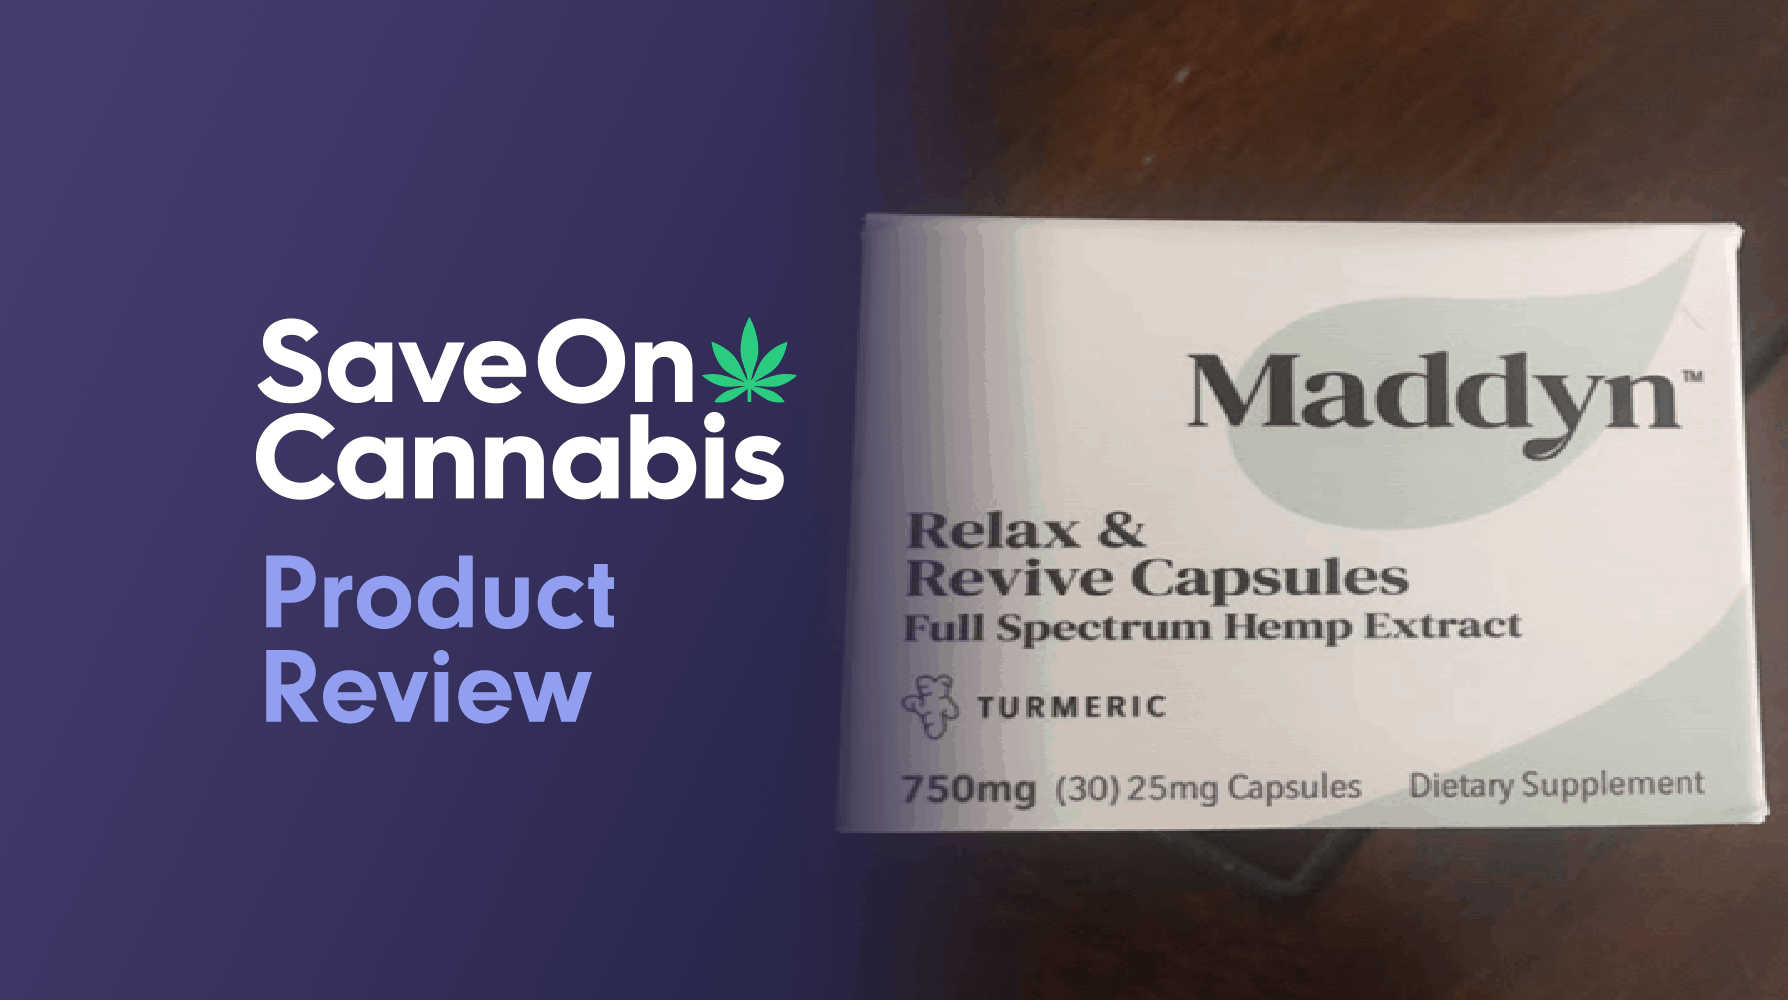 Maddyn Relax & Revive Hemp Extract Turmeric Capsules Save On Cannabis Review Website